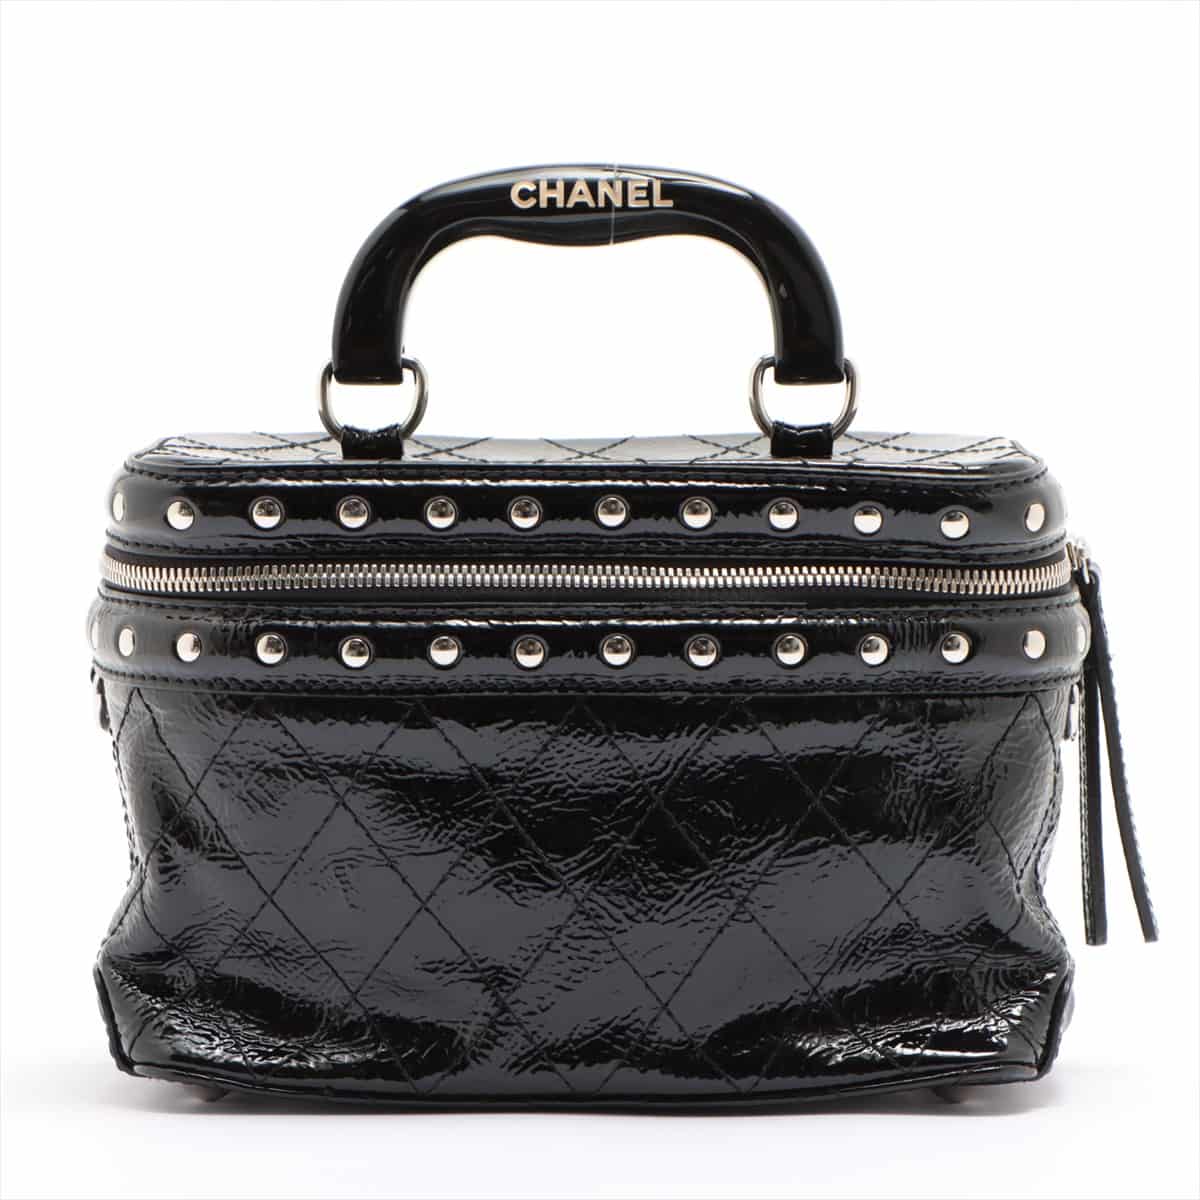 Chanel Matelasse Patent leather Vanity bag 2WAY shoulder Black Silver Metal fittings 11XXXXXX With charms